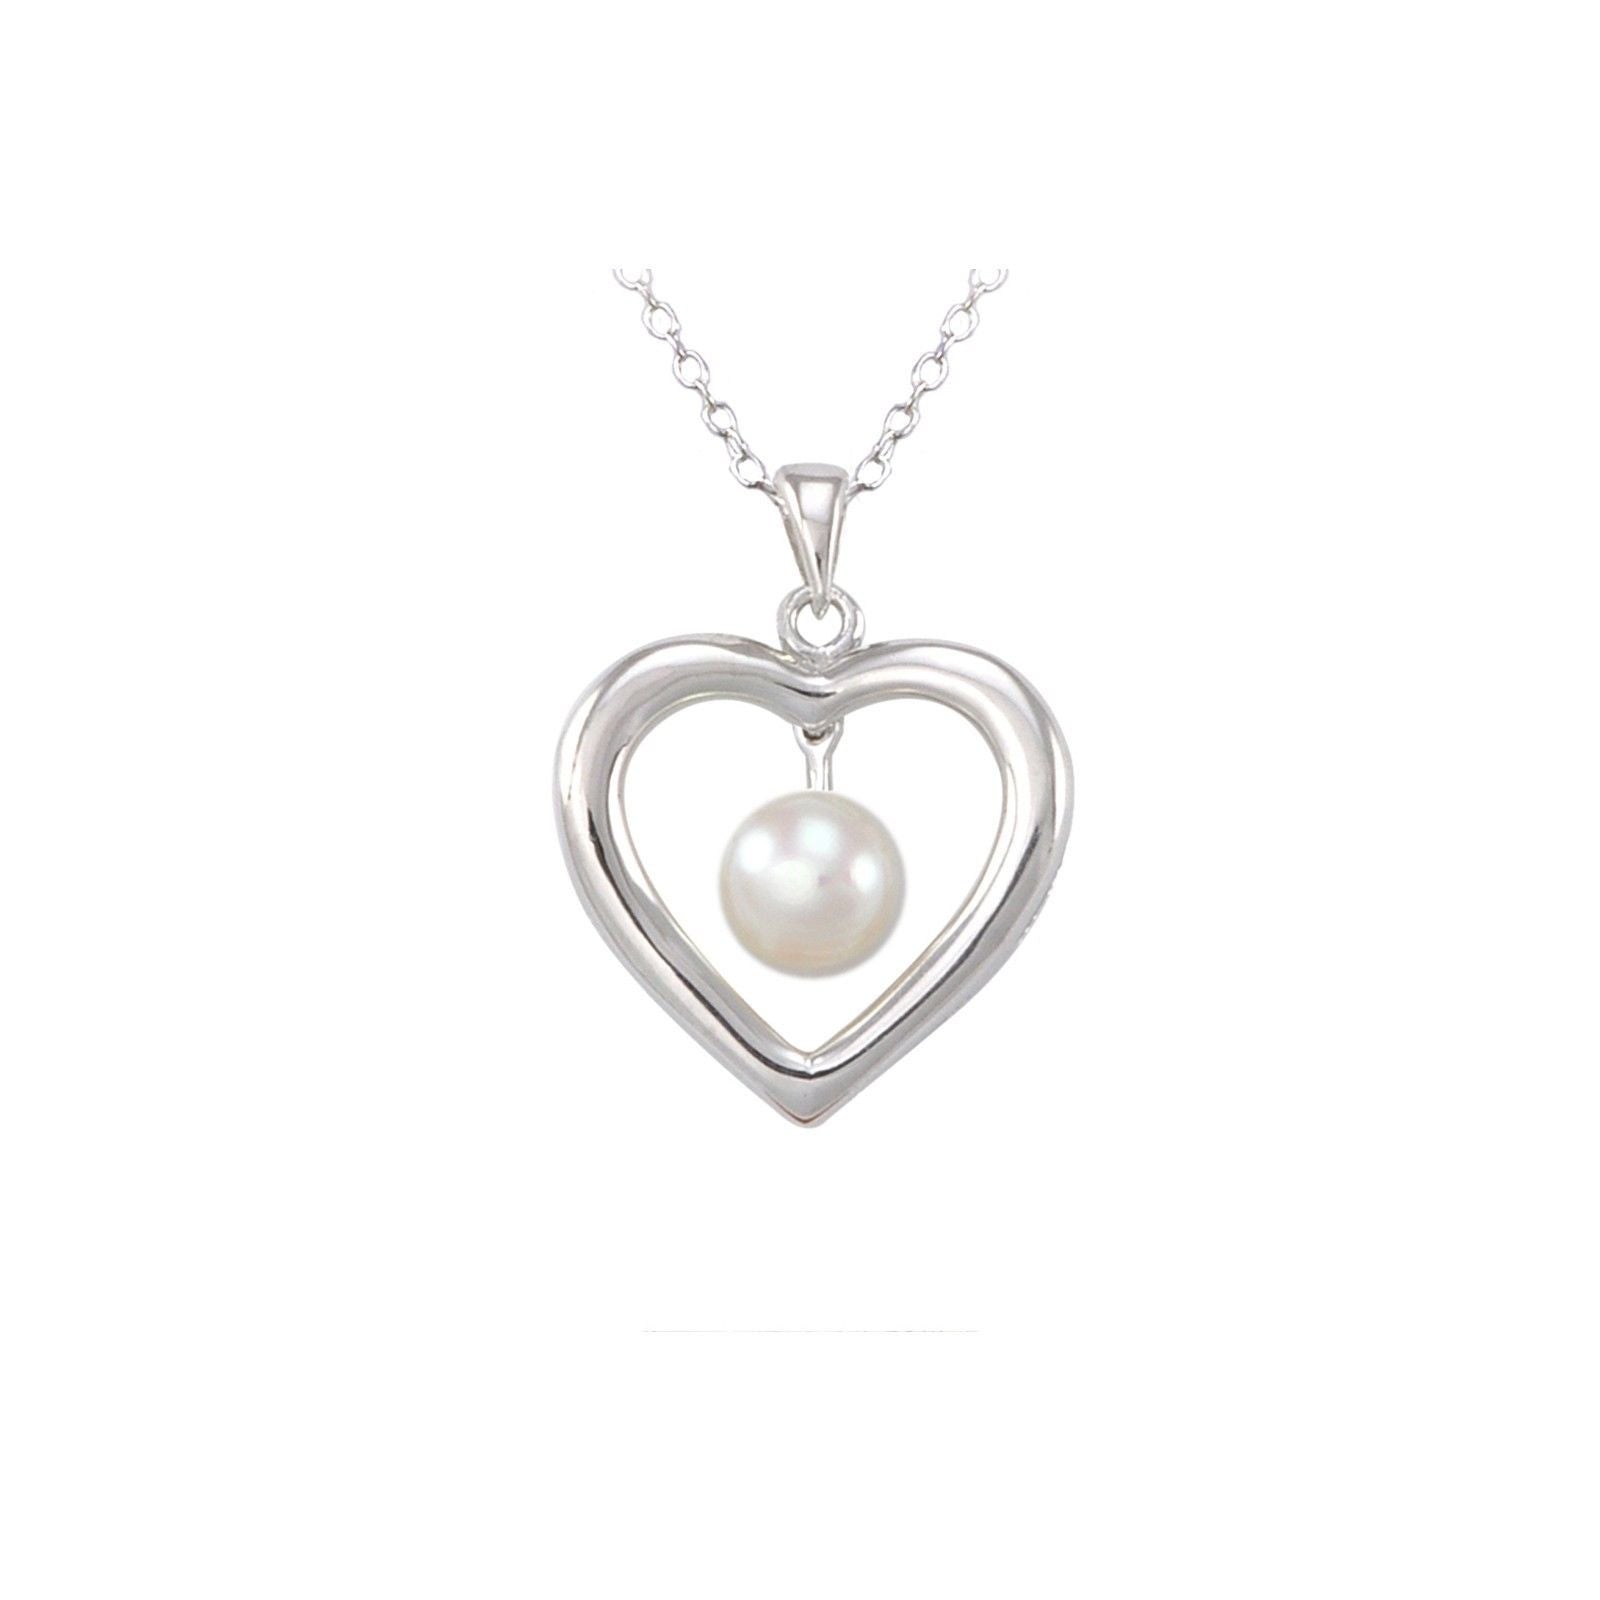 White Pearl Heart Necklace 26mm .925 Sterling Silver, 18